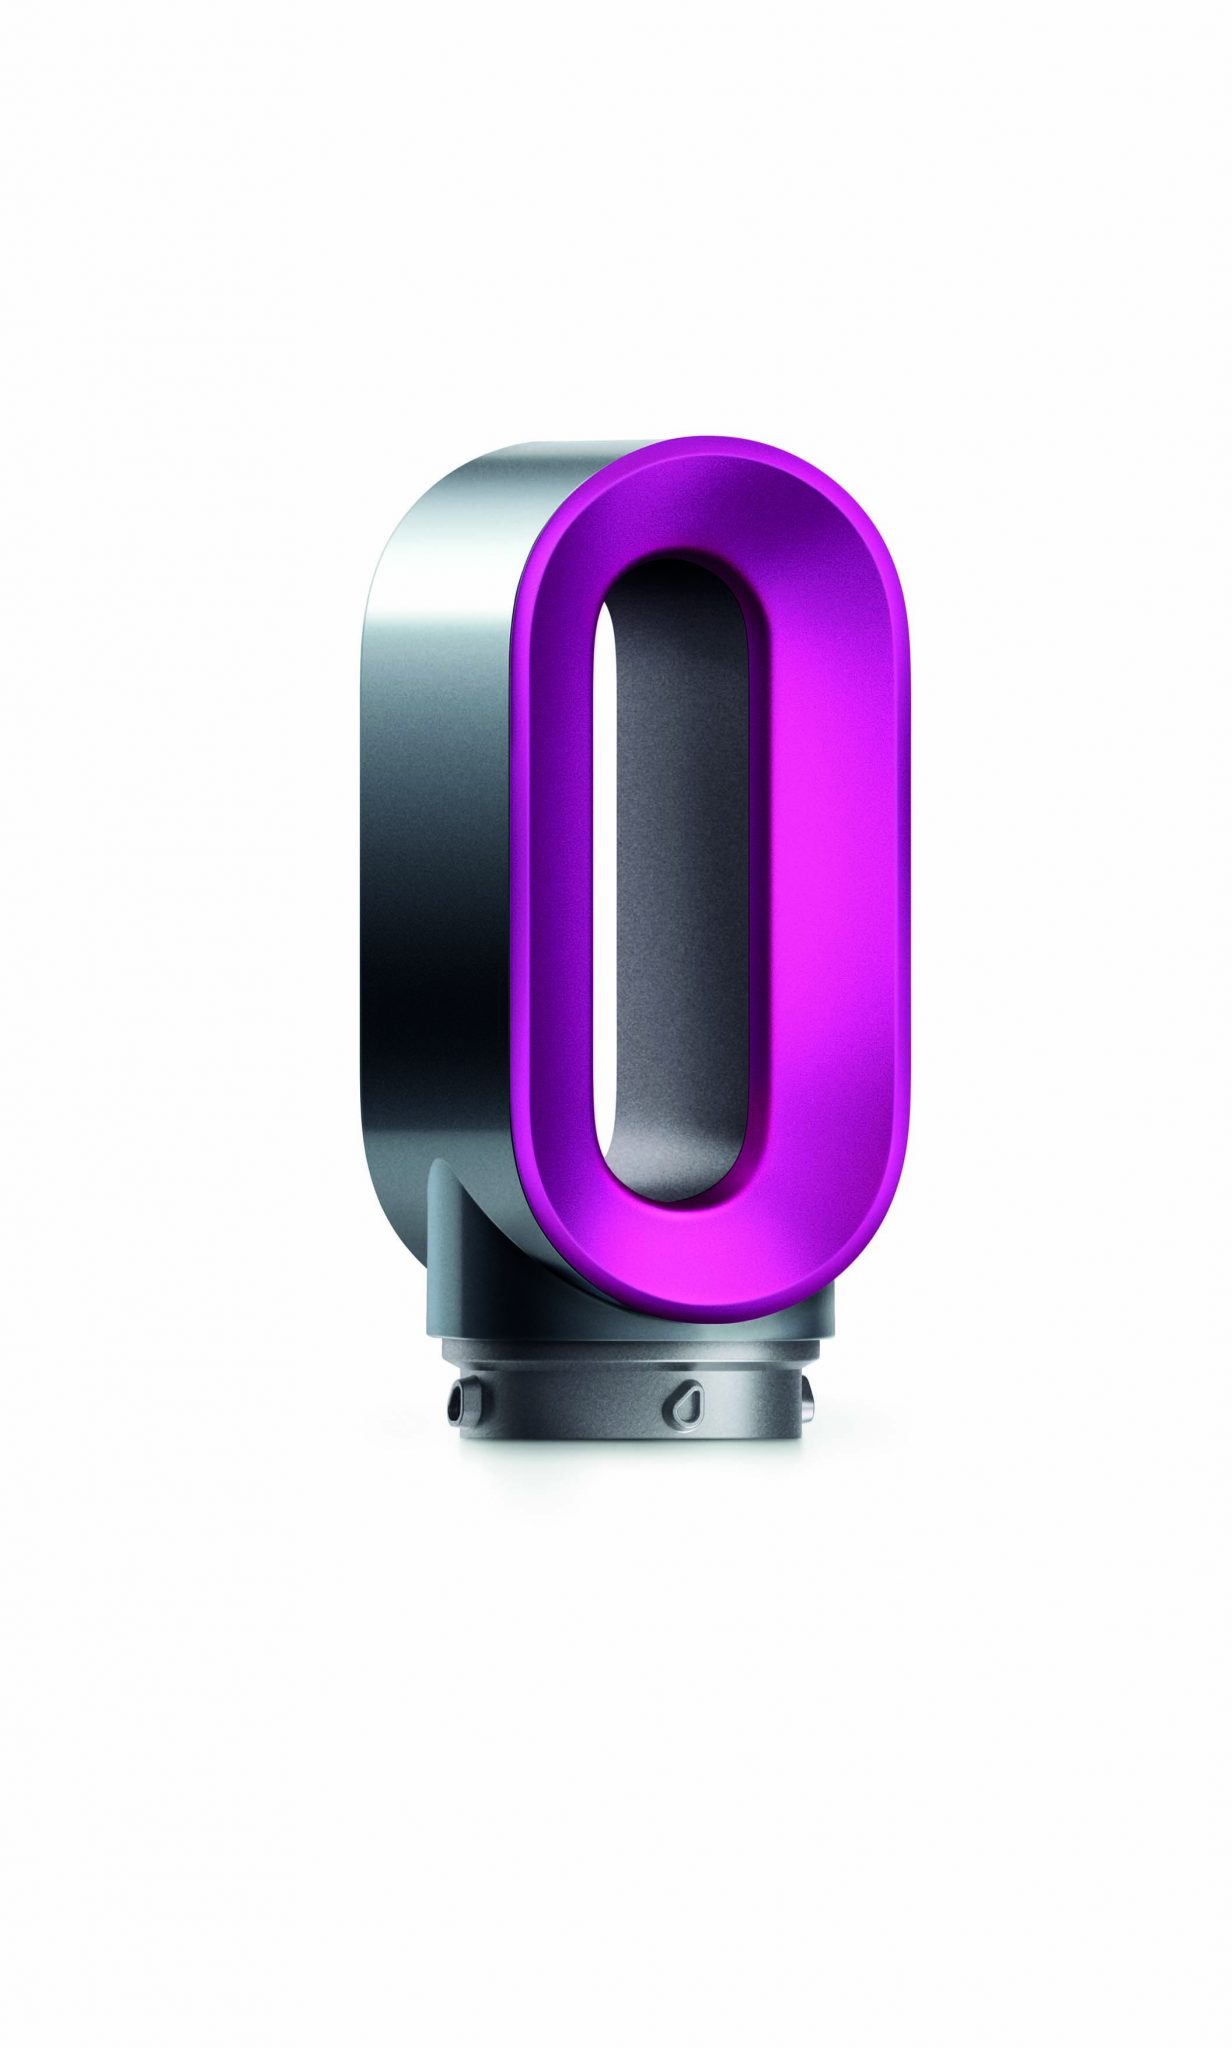 dyson’s new launch will replace every hot tool in your bathroom